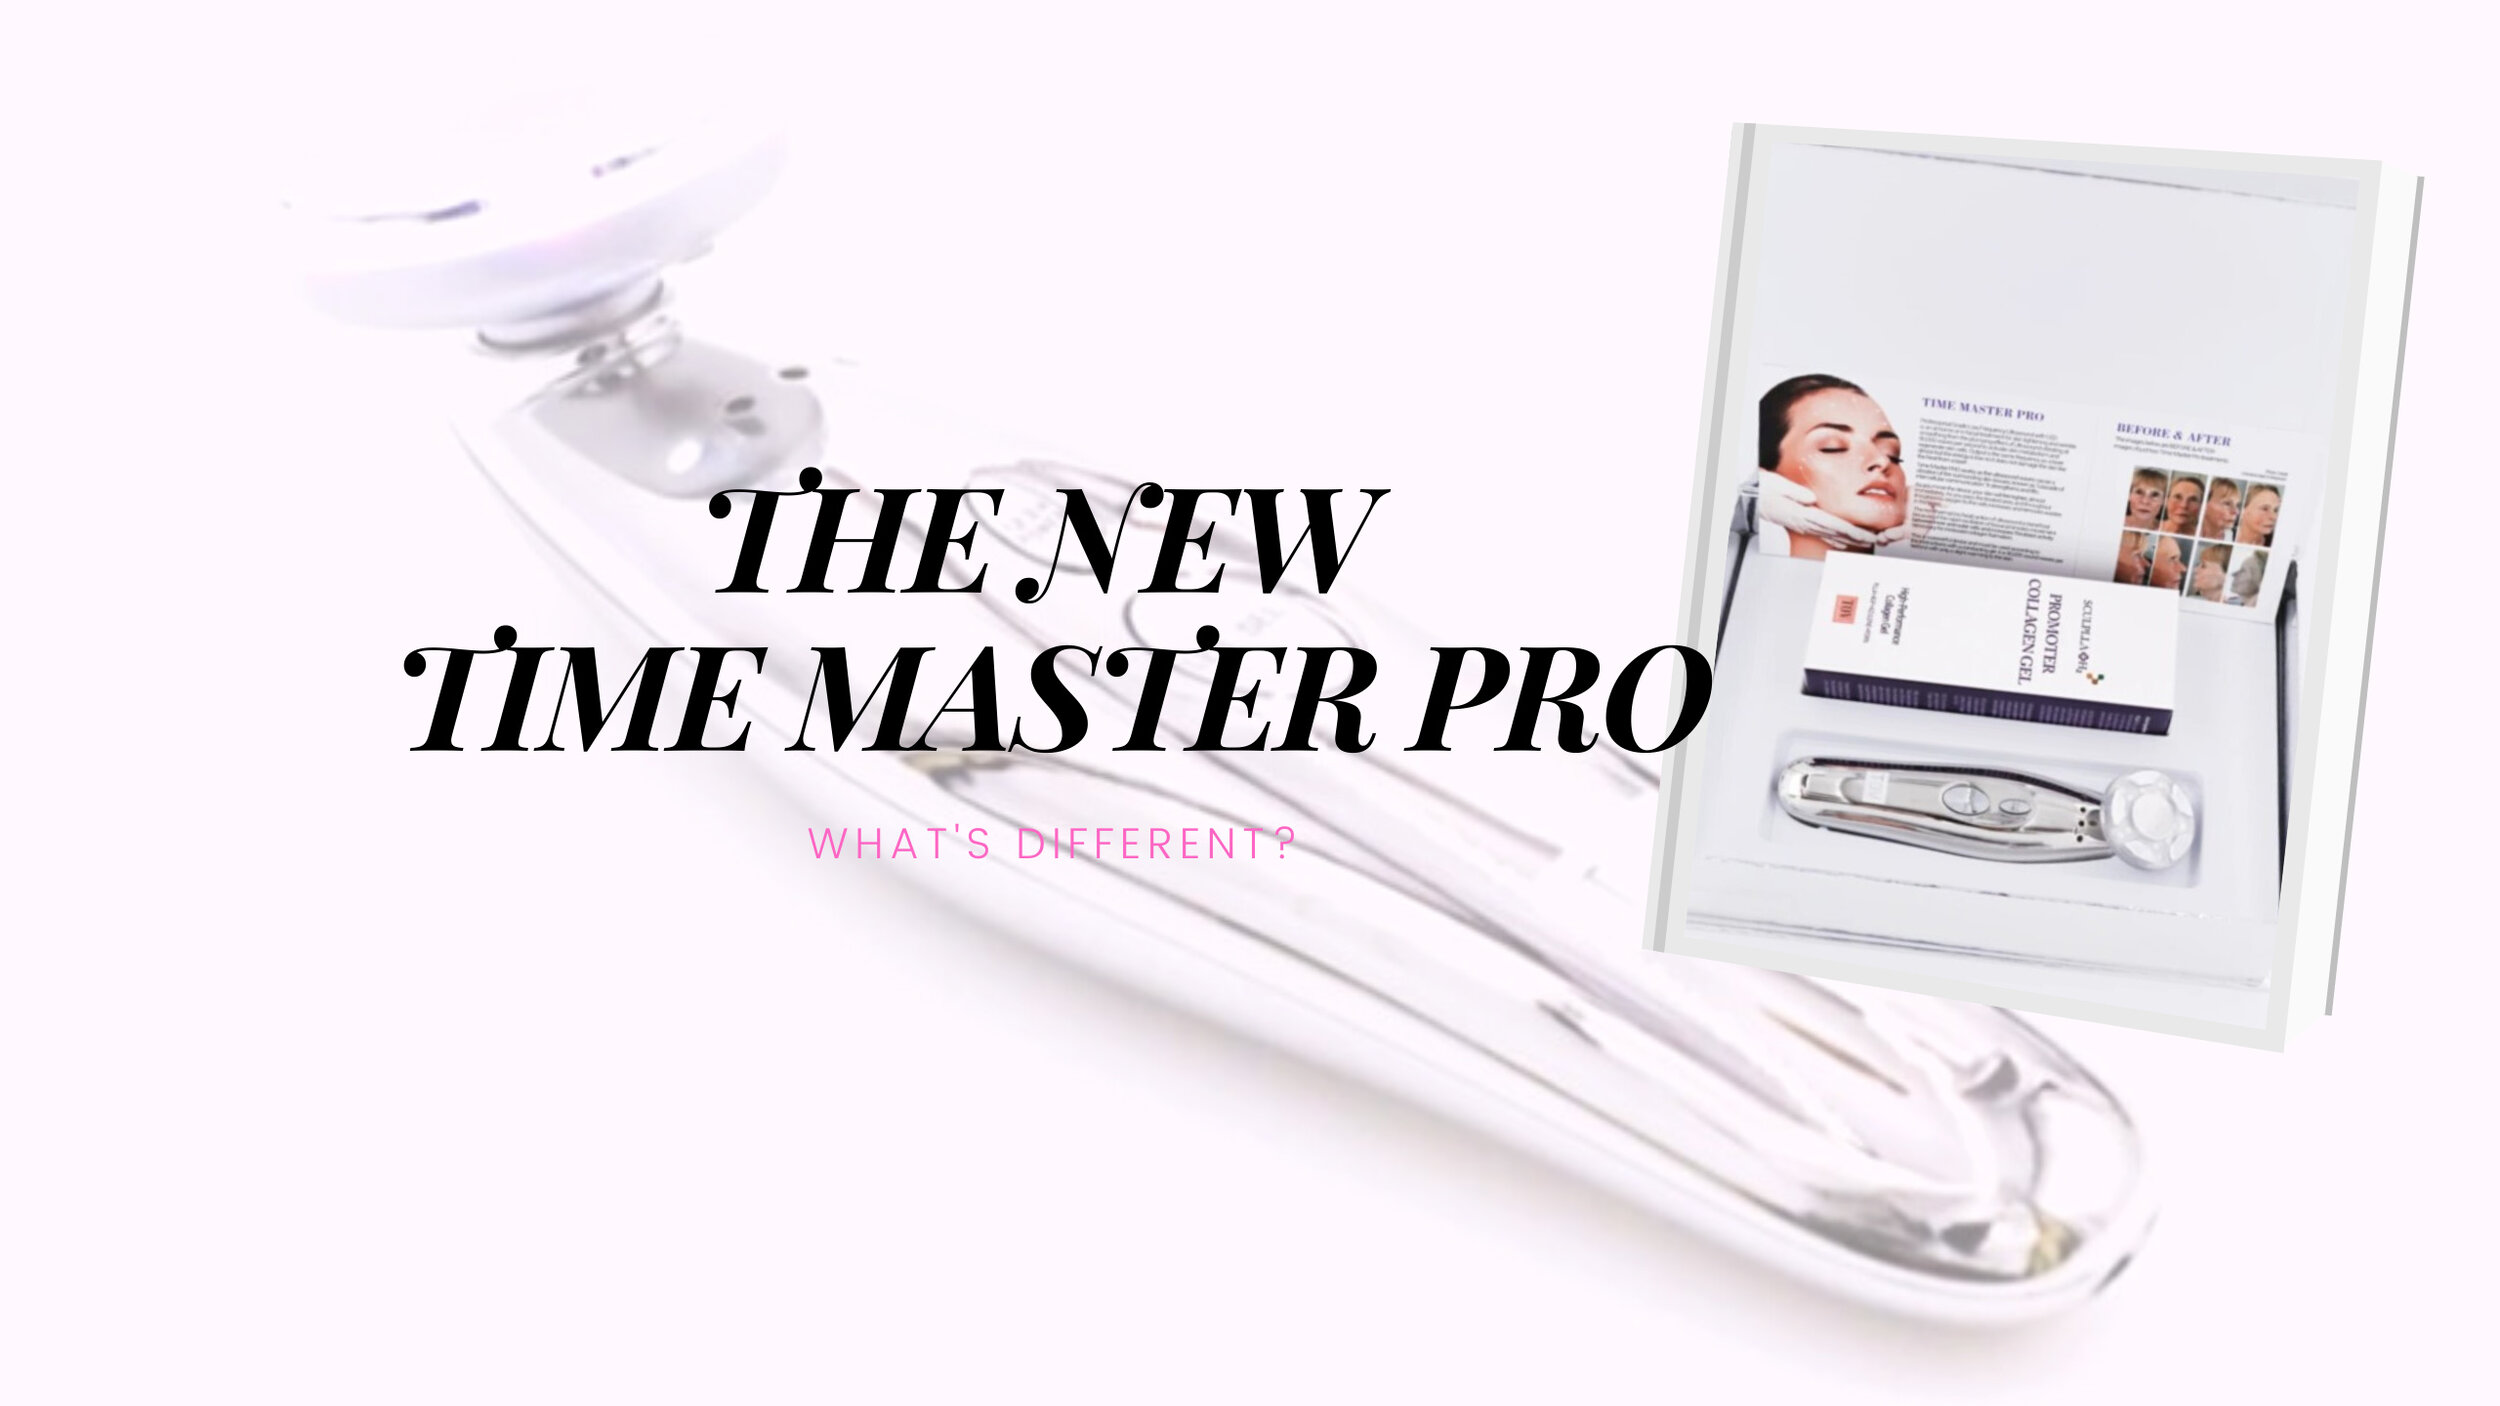 THE-NEW-TIME-MASTER-PRO.jpg